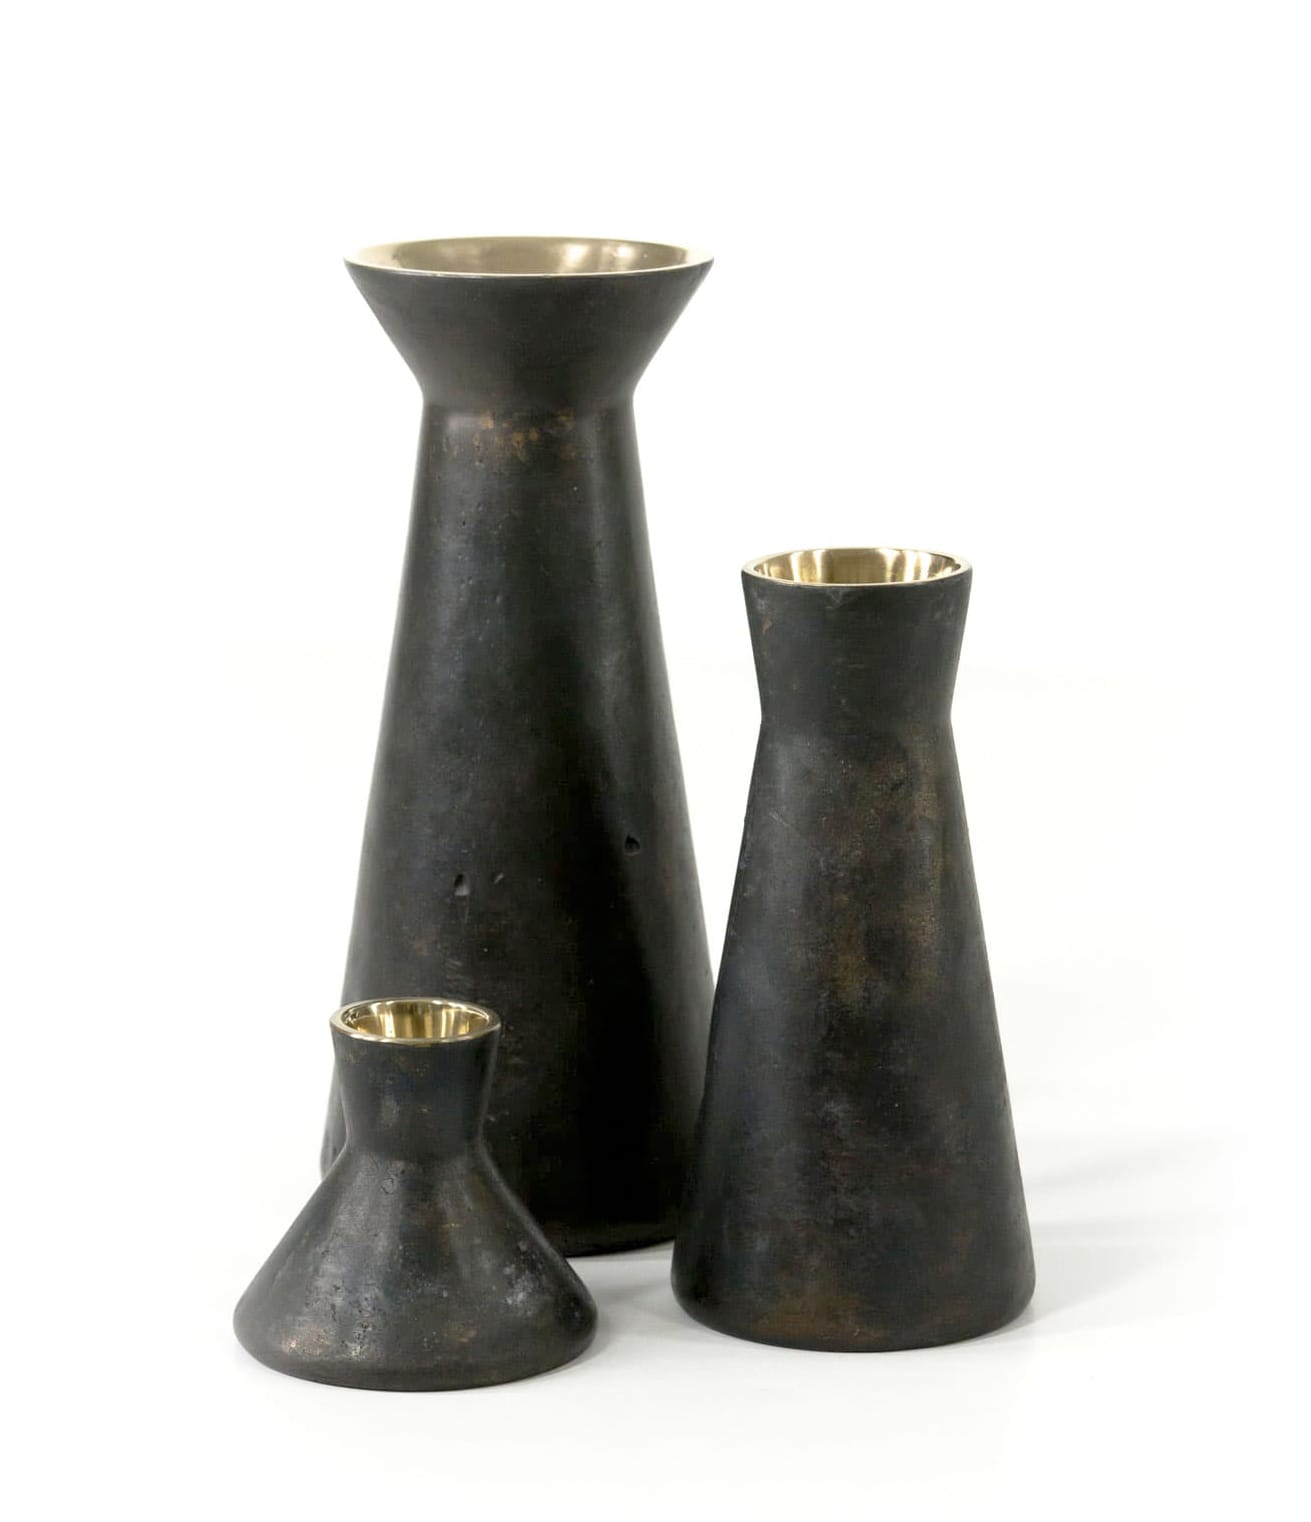 Three Y-01 vases in three sizes in simple tapered shape with collar on top made of bronze. Inside surface is gold and shiny and outside dark and matt